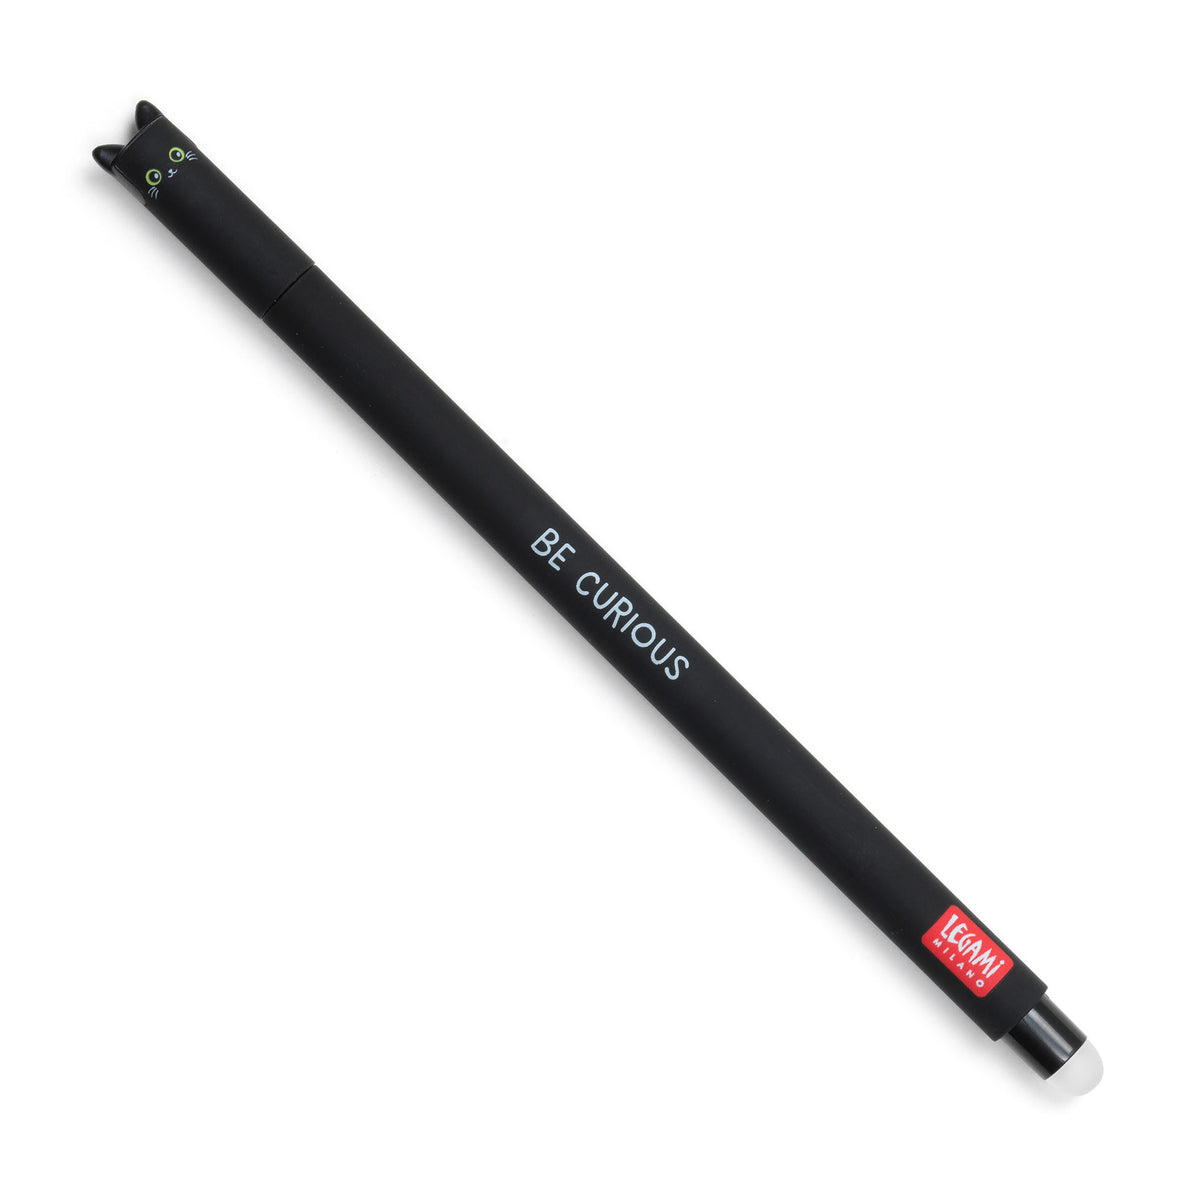 An image of a black coloured erasable pen by Legami. The cap of the pen is like the head of a cat with cat ears formed on the top. It has an erasable ball at the other end of the pen.